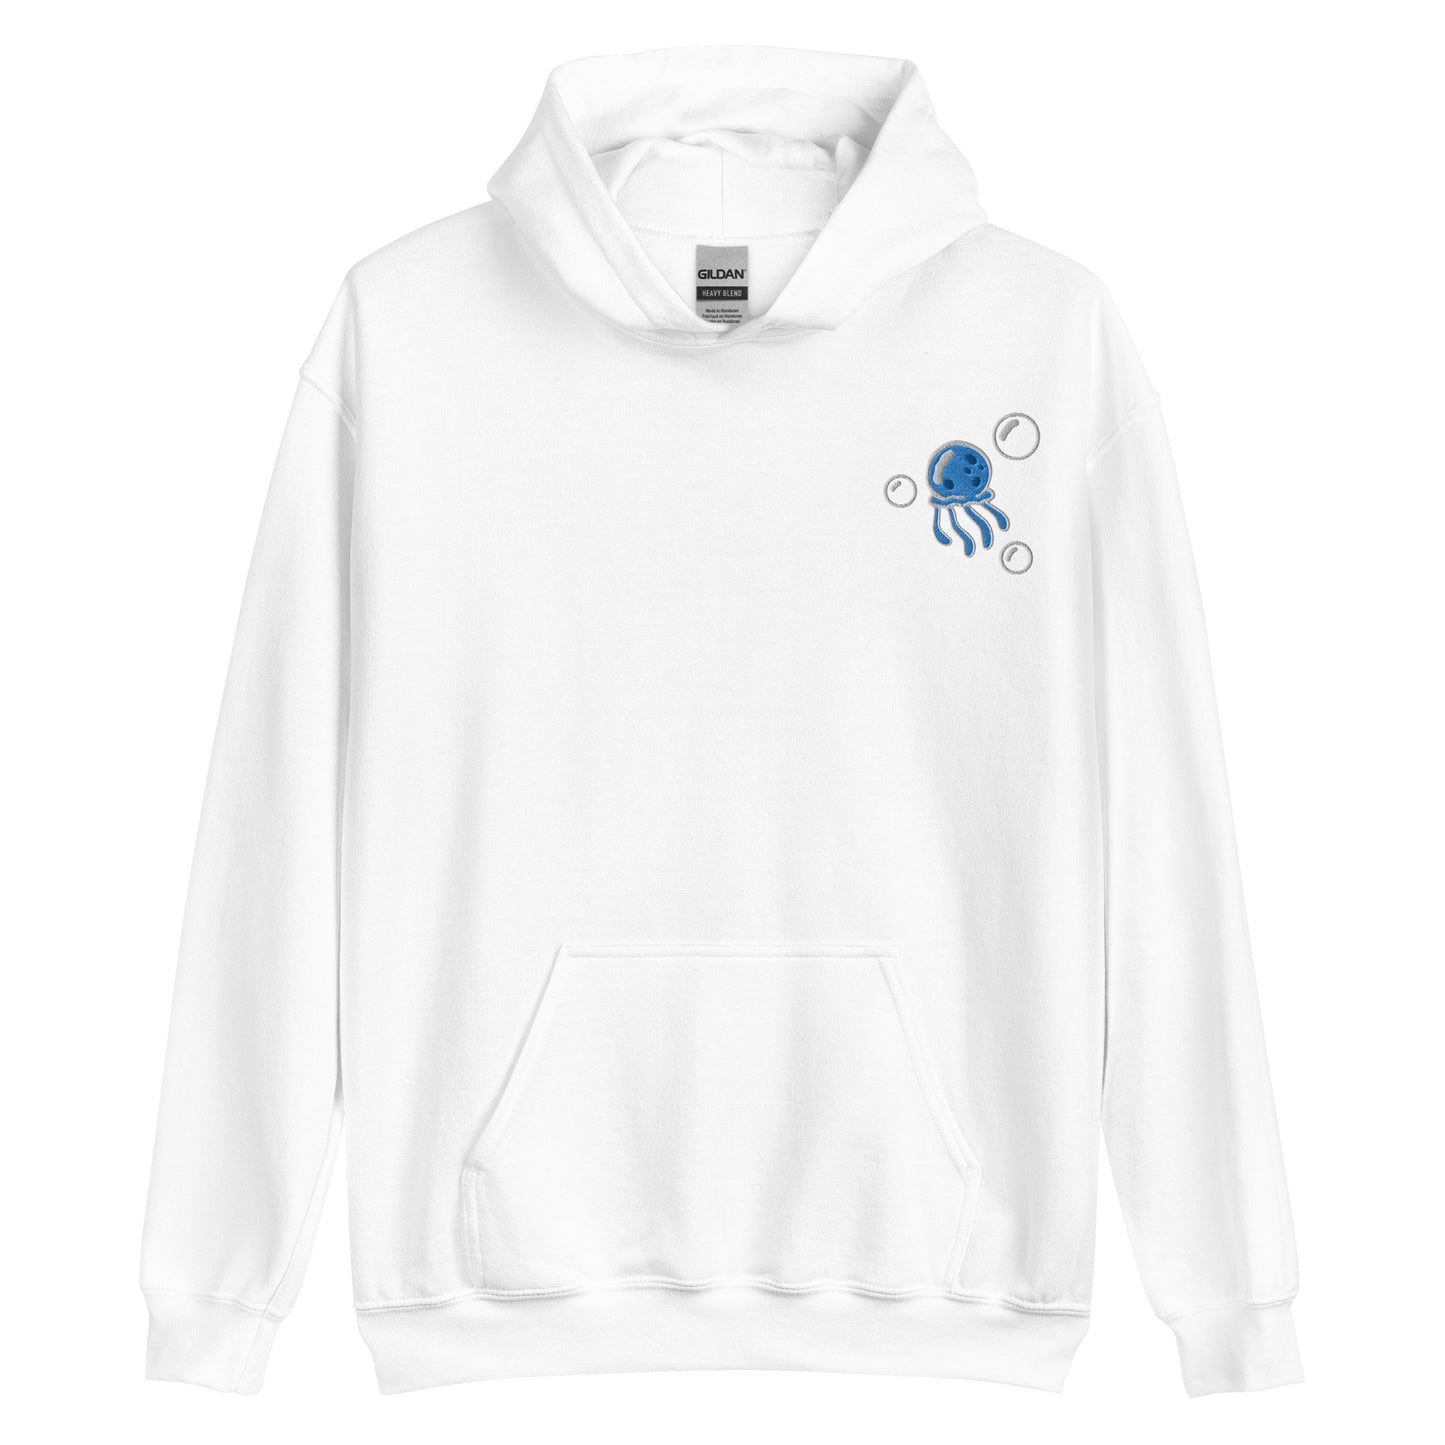 Jellyfish BLUE embroidered pullover hoodie